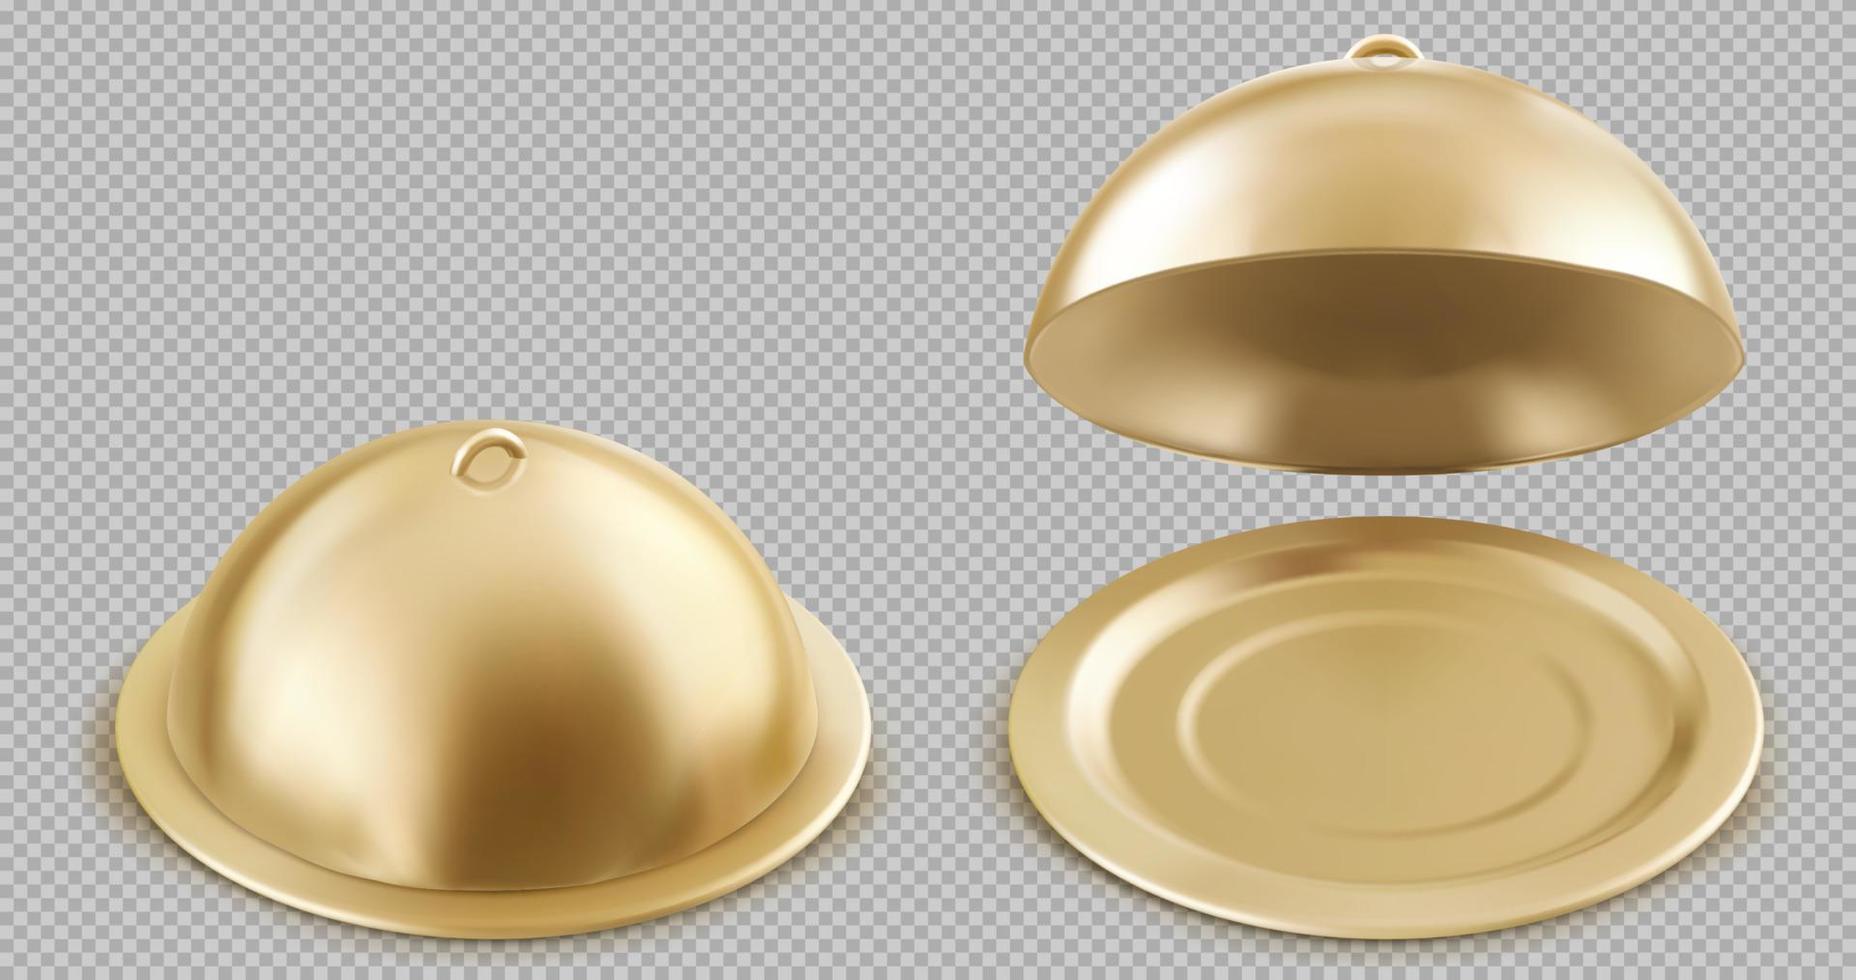 Realistic open and closed golden cloche food trays vector